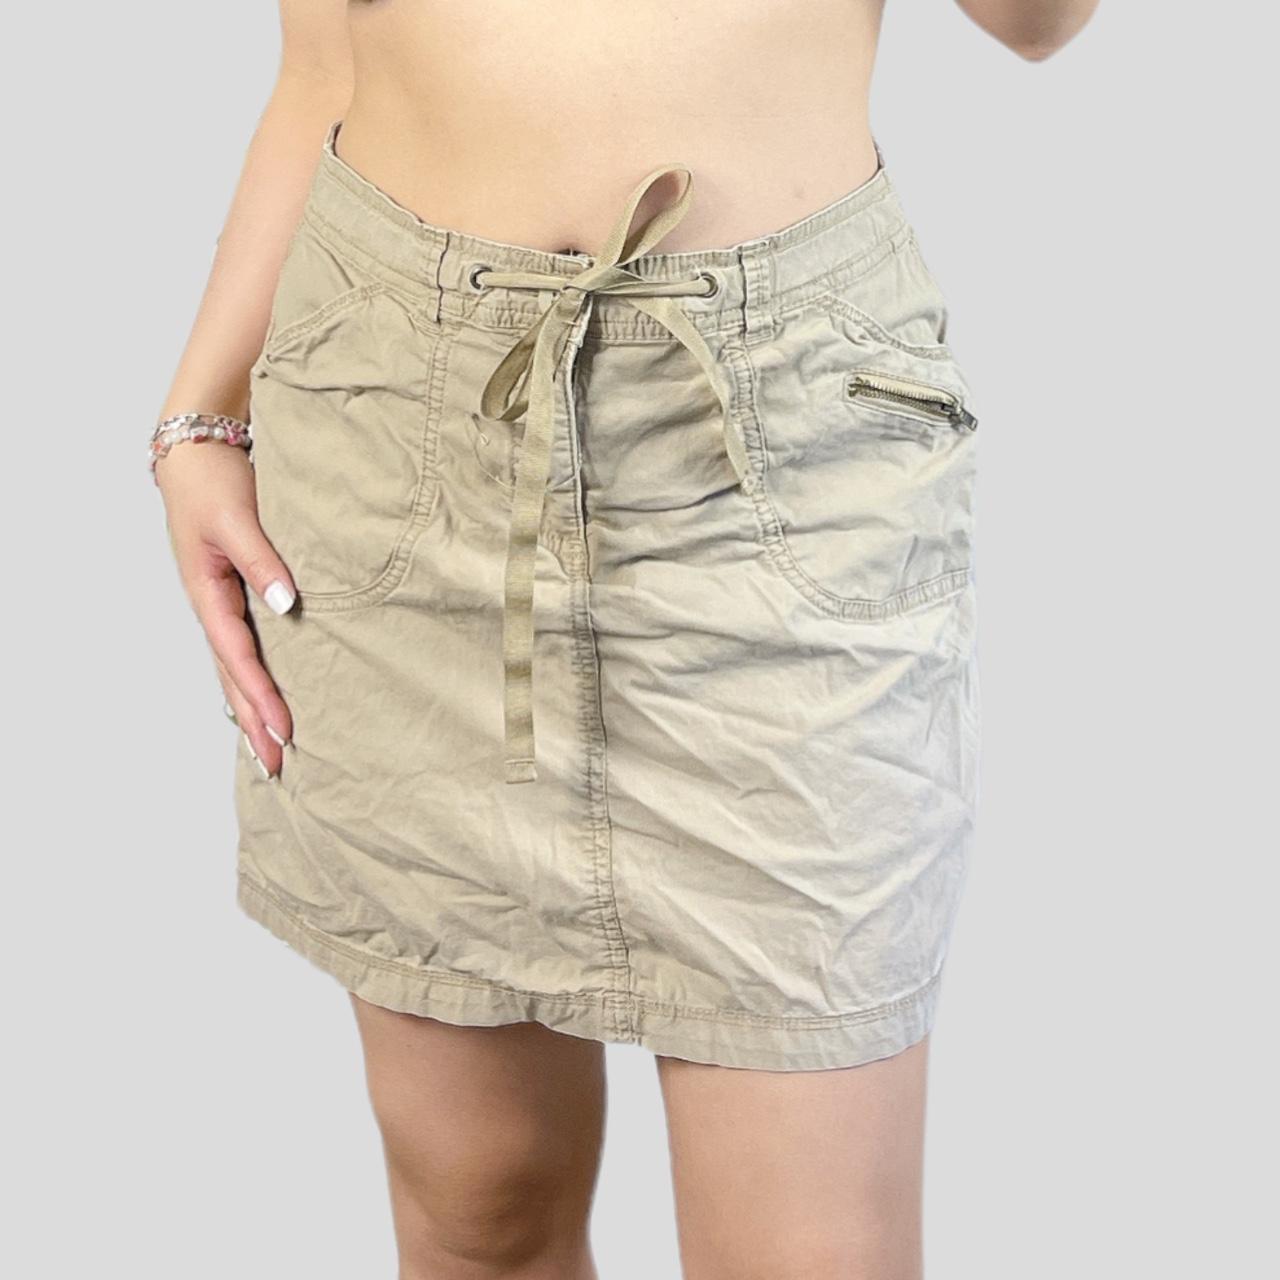 Product Image 1 - Y2k earthcore mini cargo skirt

in